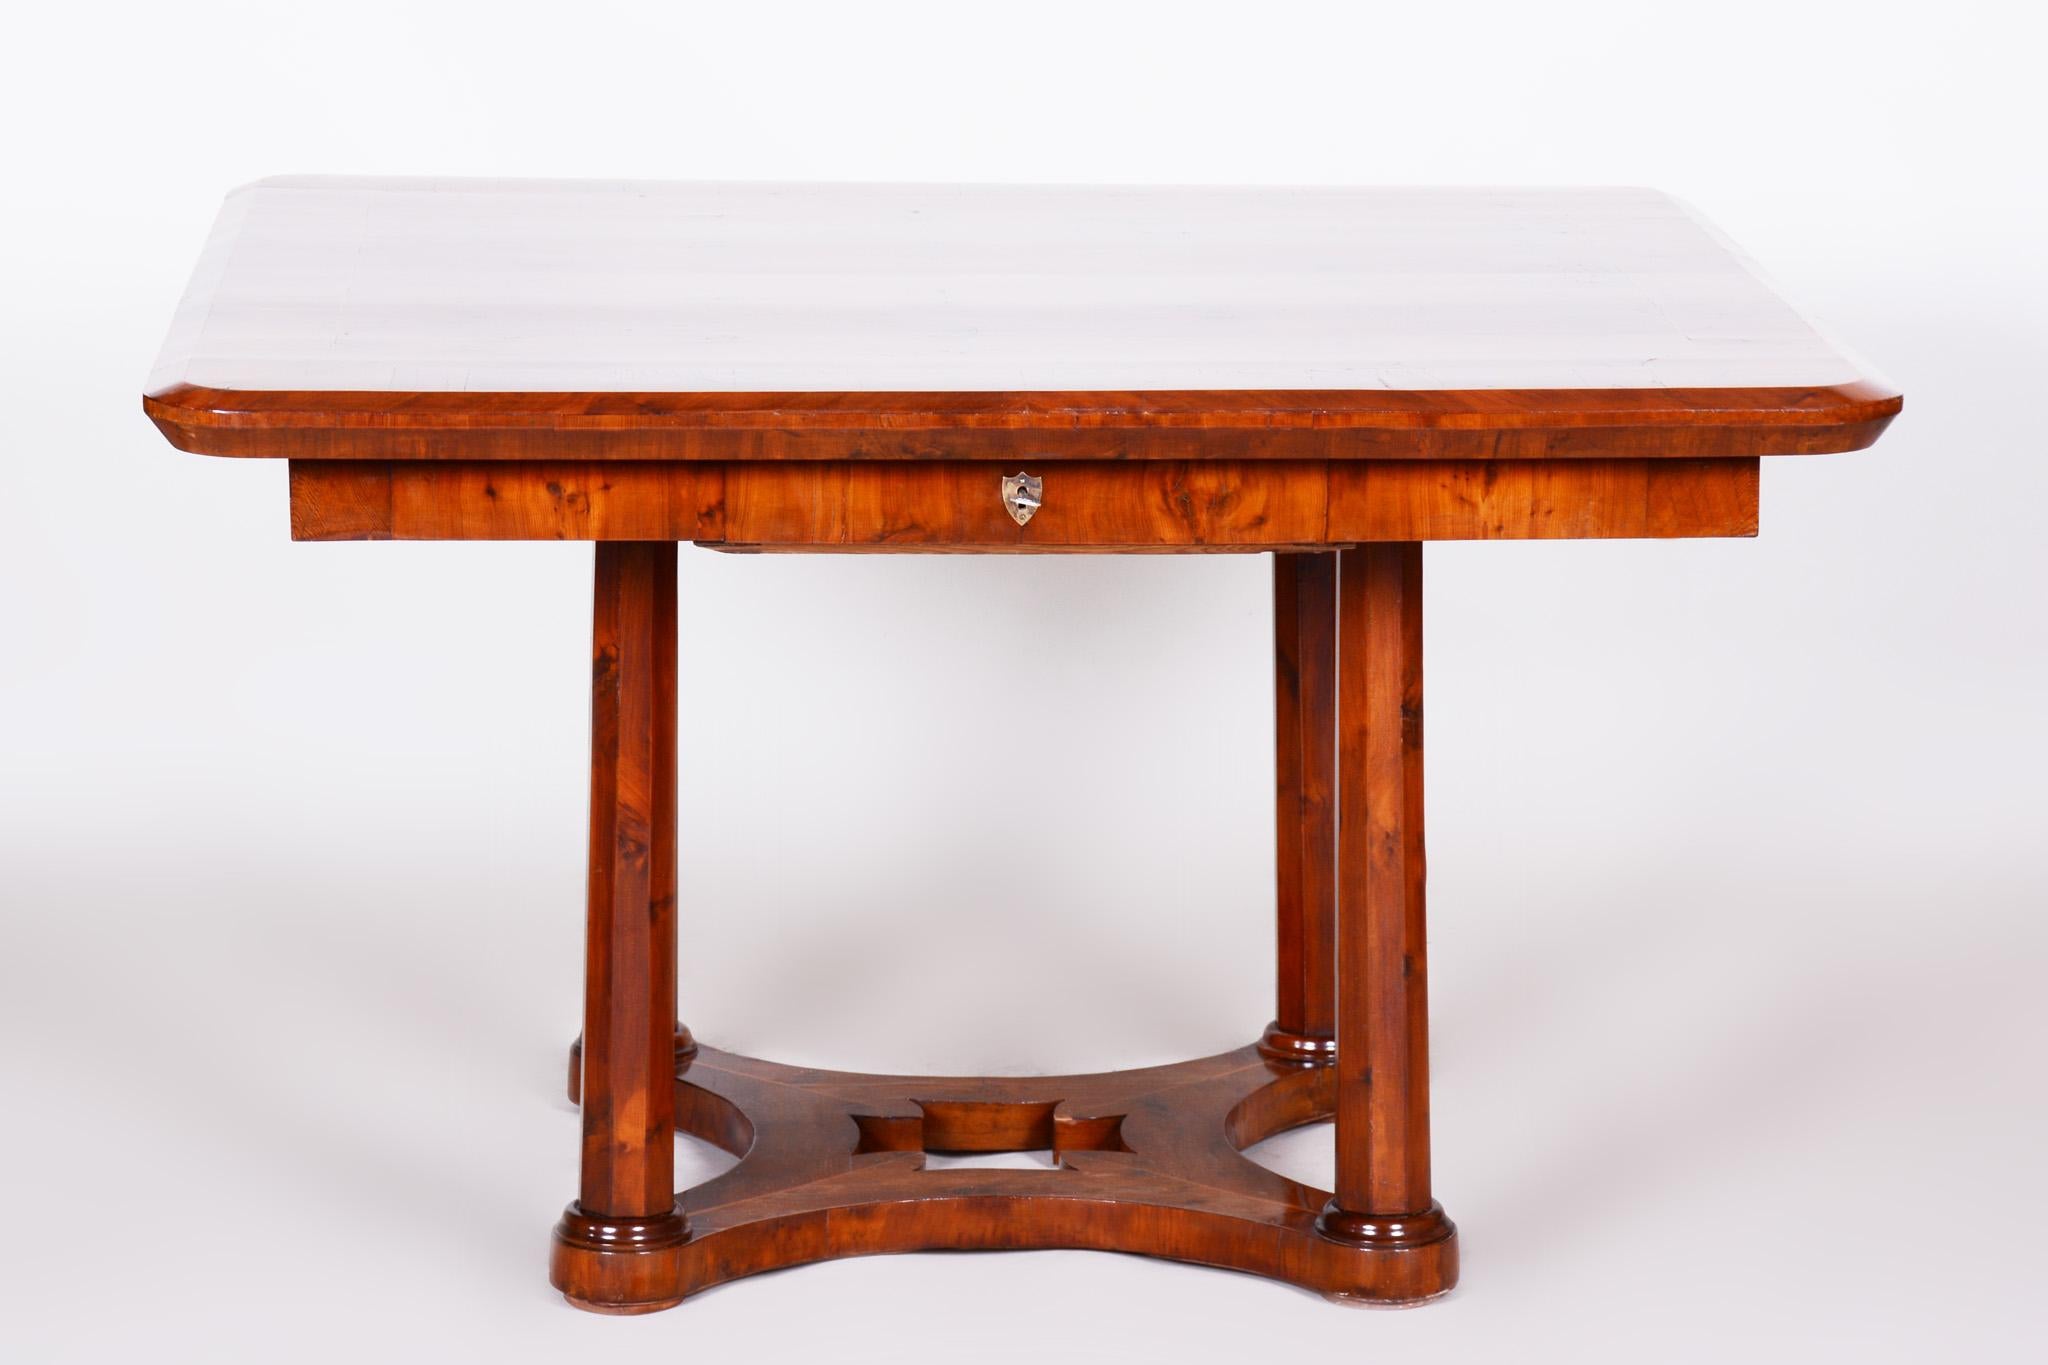 Restored Biedermeier dining table.

Source: Austria
Period: 1830-1839
Material: Yew-tree

An atypical castle-style table.
Very well preserved. Revitalized varnish.